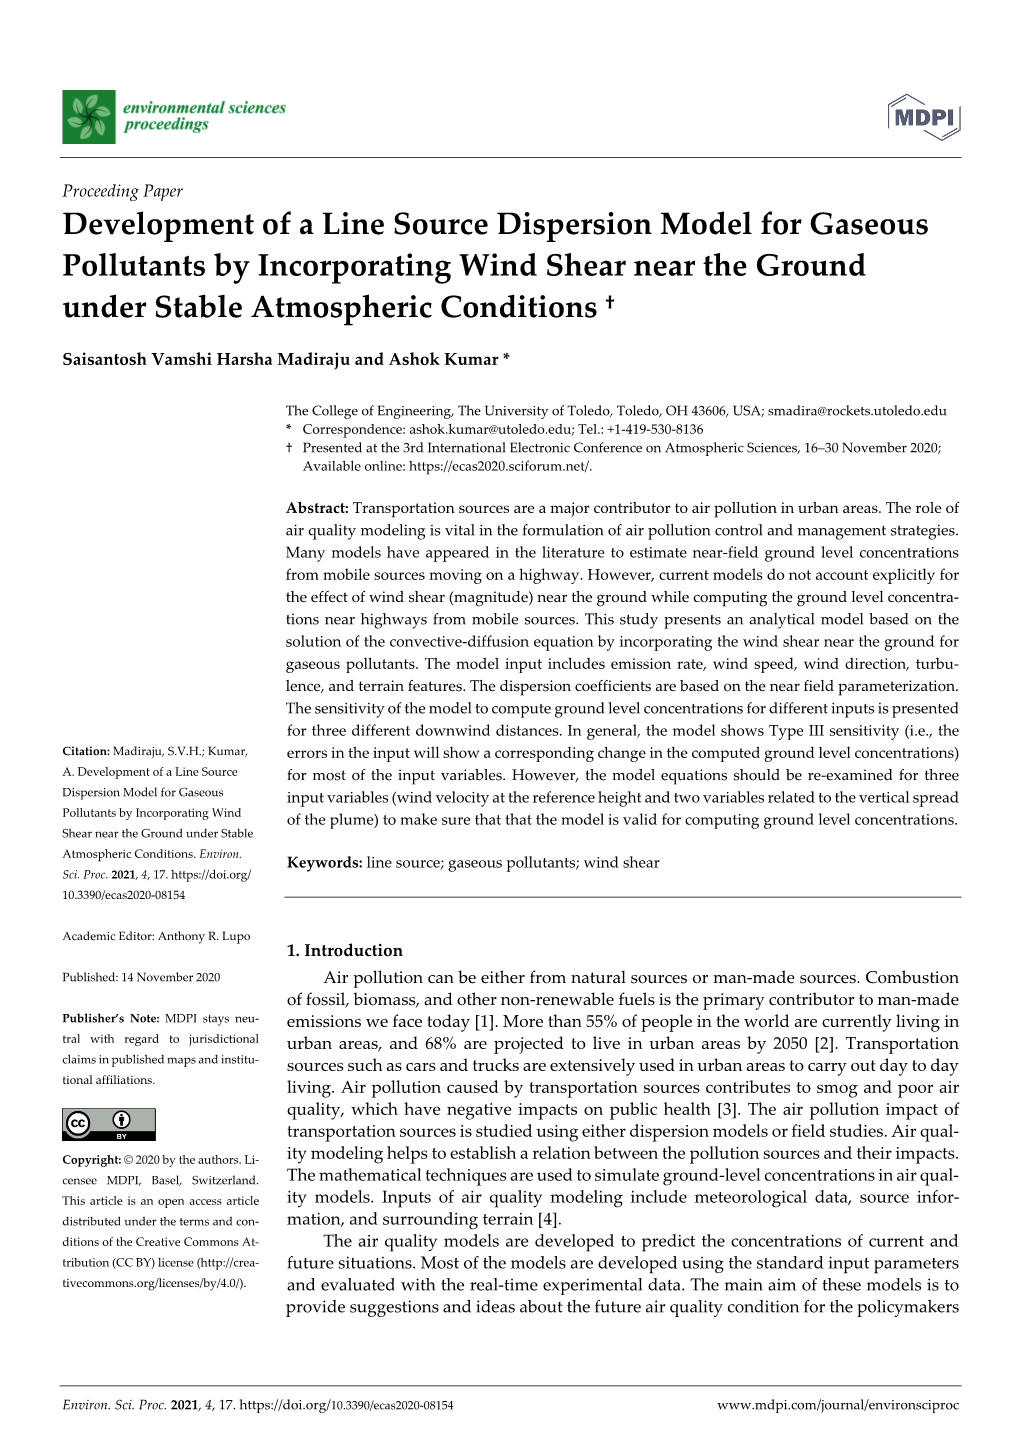 Development of a Line Source Dispersion Model for Gaseous Pollutants by Incorporating Wind Shear Near the Ground Under Stable Atmospheric Conditions †